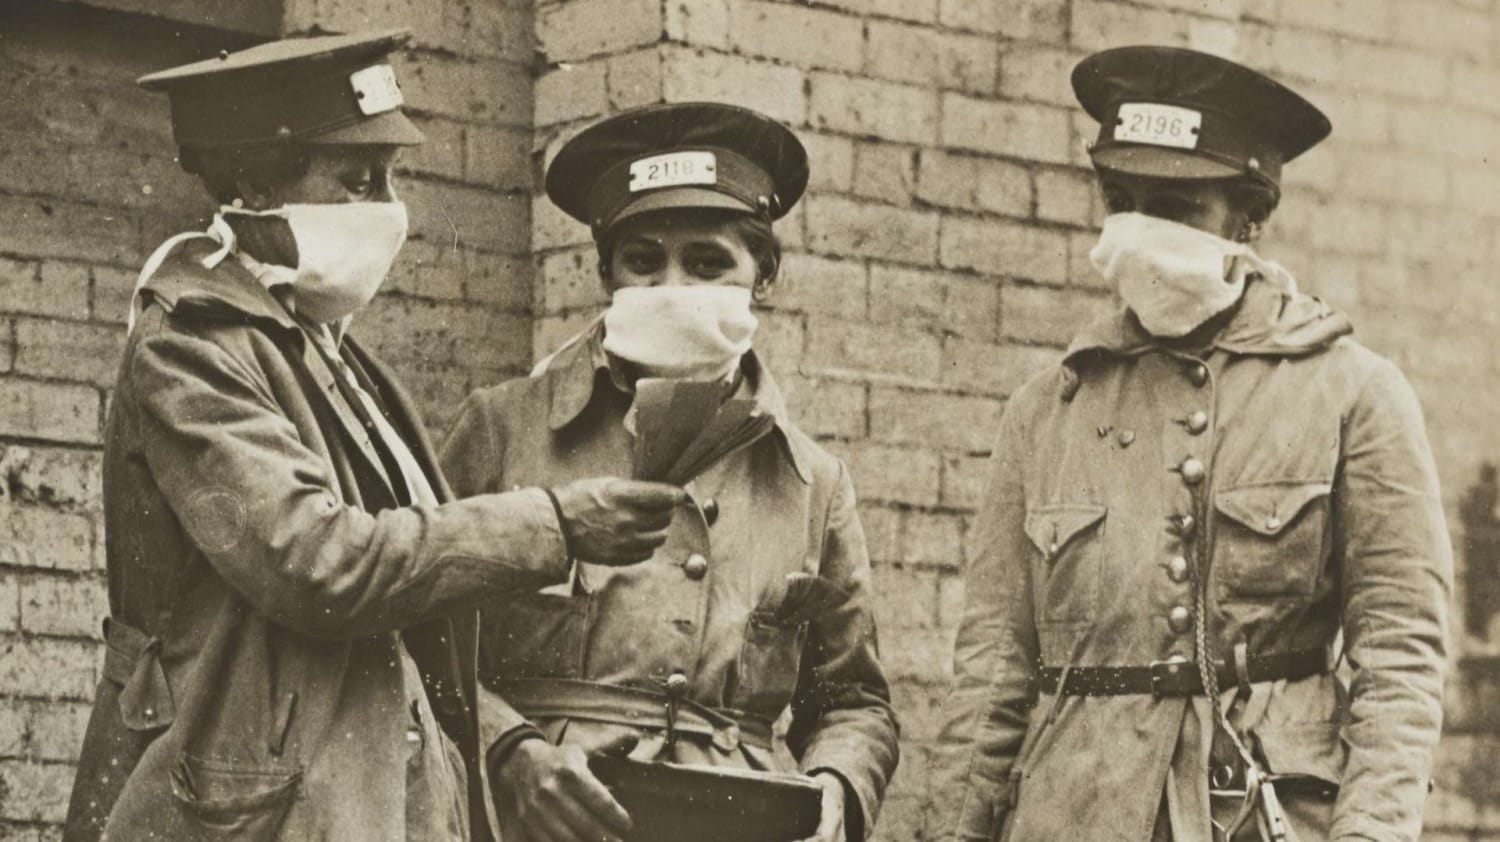 At the Height of the 1918 Flu Pandemic, the Anti-Mask League of San Francisco Formed to Protest PPE